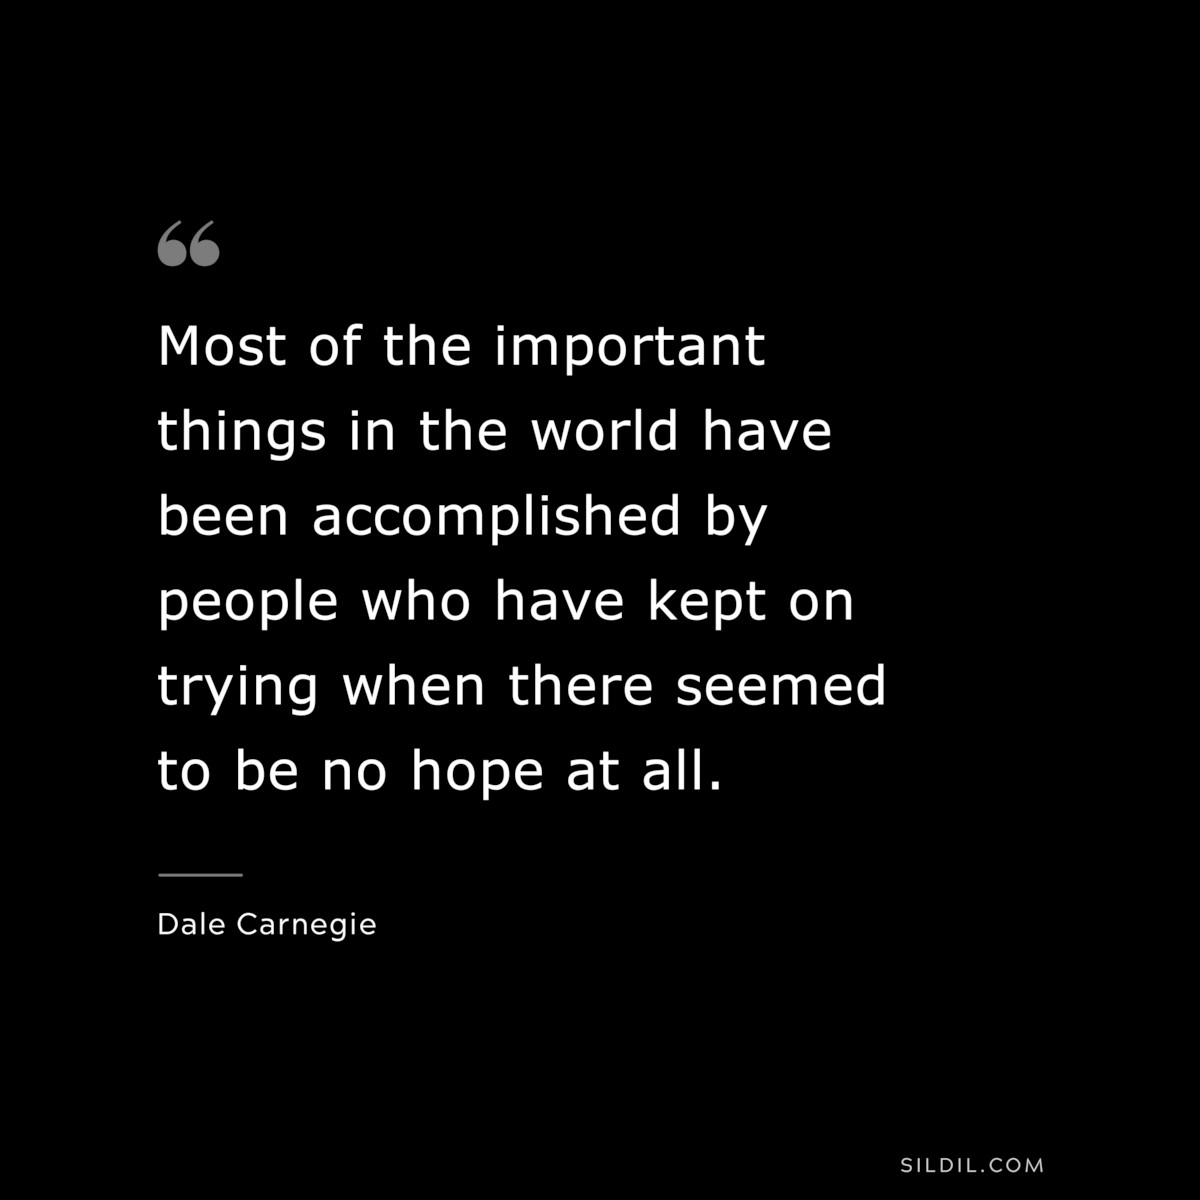 Most of the important things in the world have been accomplished by people who have kept on trying when there seemed to be no hope at all.― Dale Carnegie